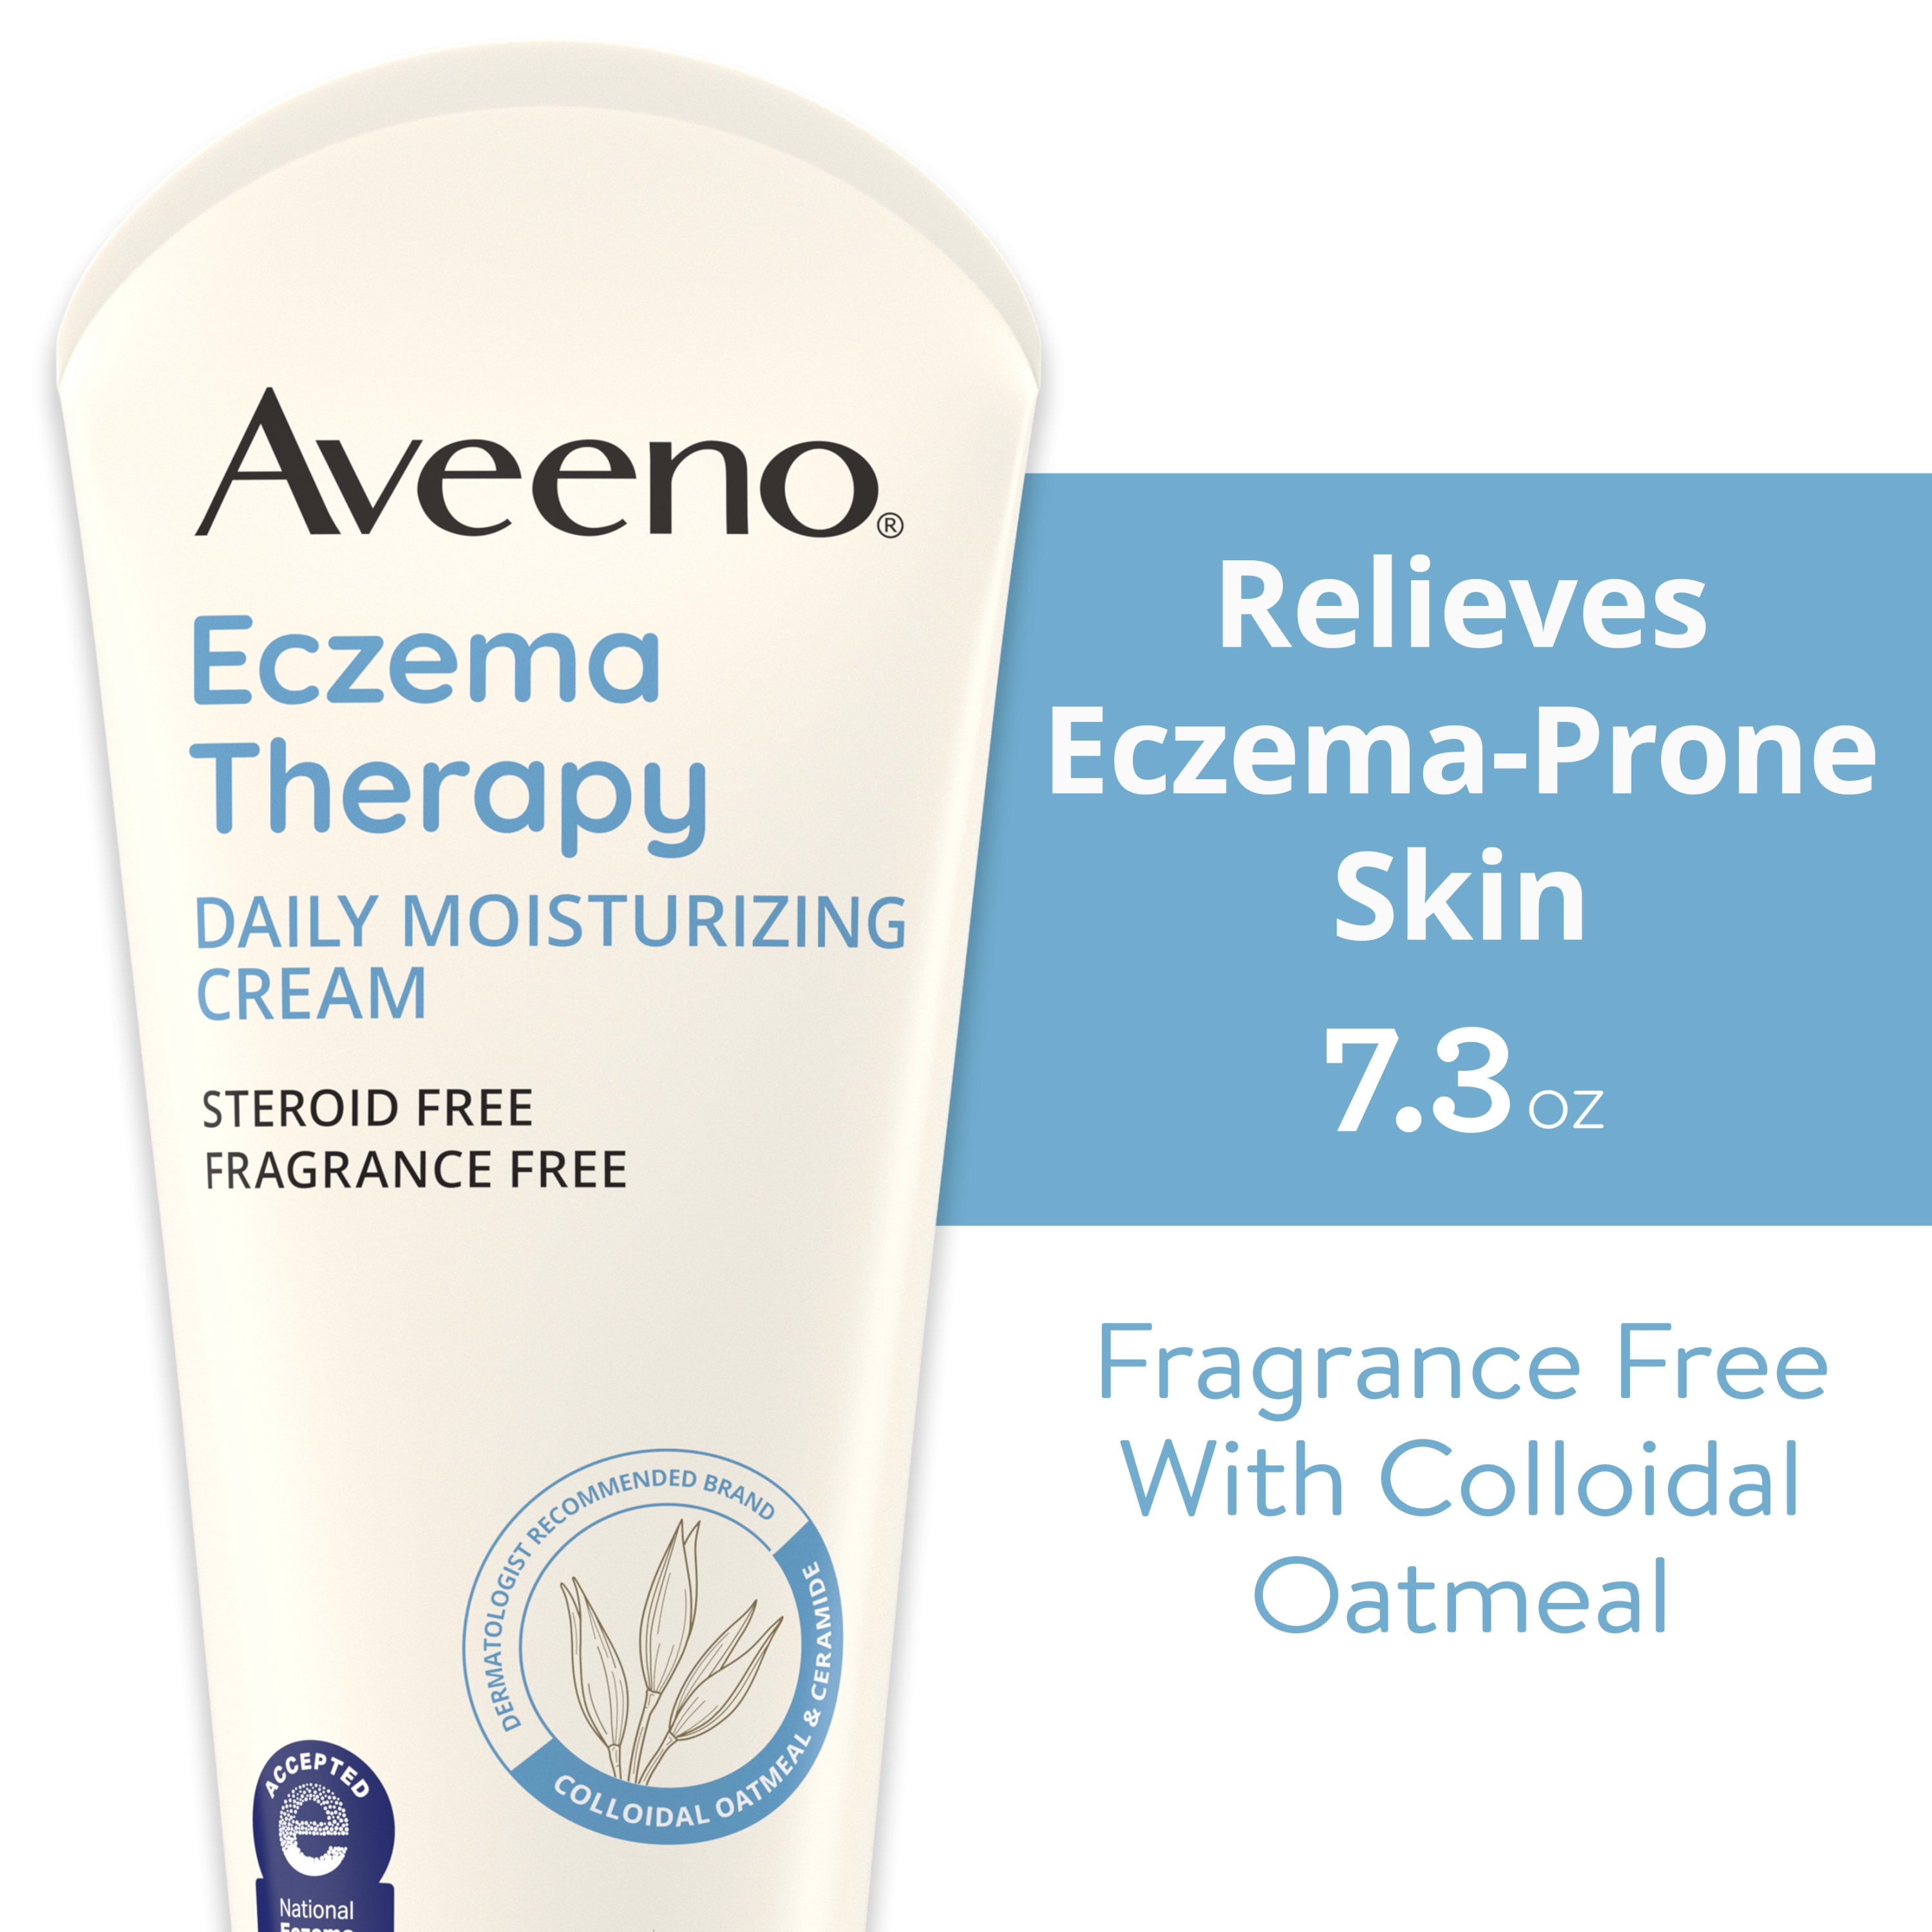 Aveeno Eczema Therapy Daily Soothing Body Cream, Steroid-Free, 7.3 oz